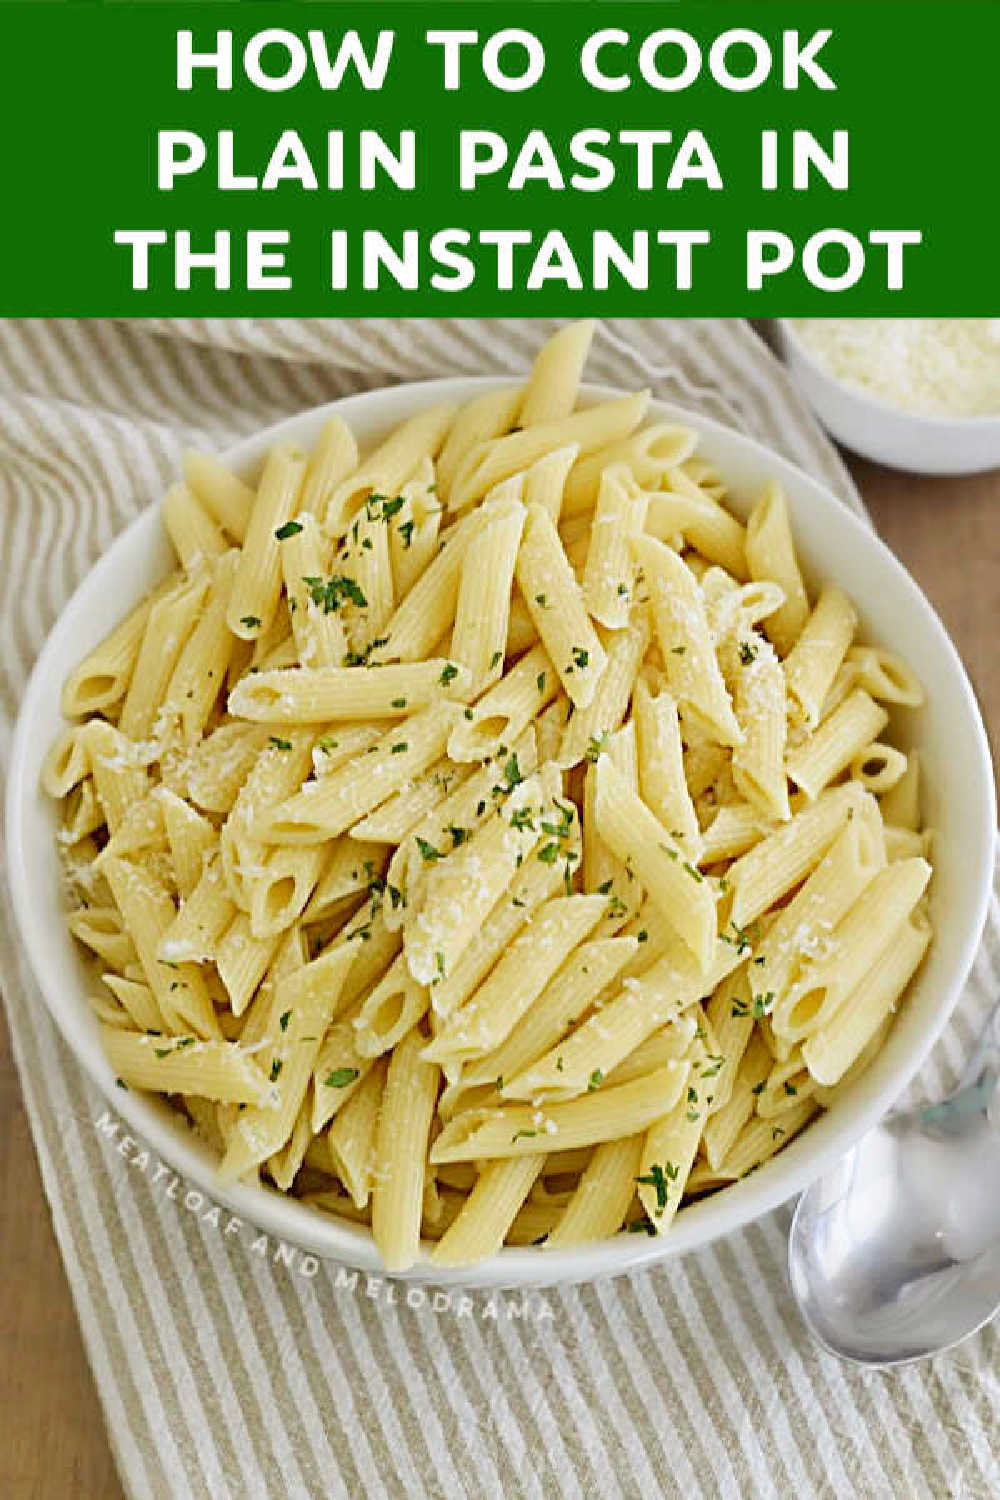 Learn How to Cook Pasta in the Instant Pot electric pressure cooker with this easy recipe for plain pasta. Only 3 ingredients for perfect pasta that you can use with a simple sauce or for pasta salad recipes.  via @meamel